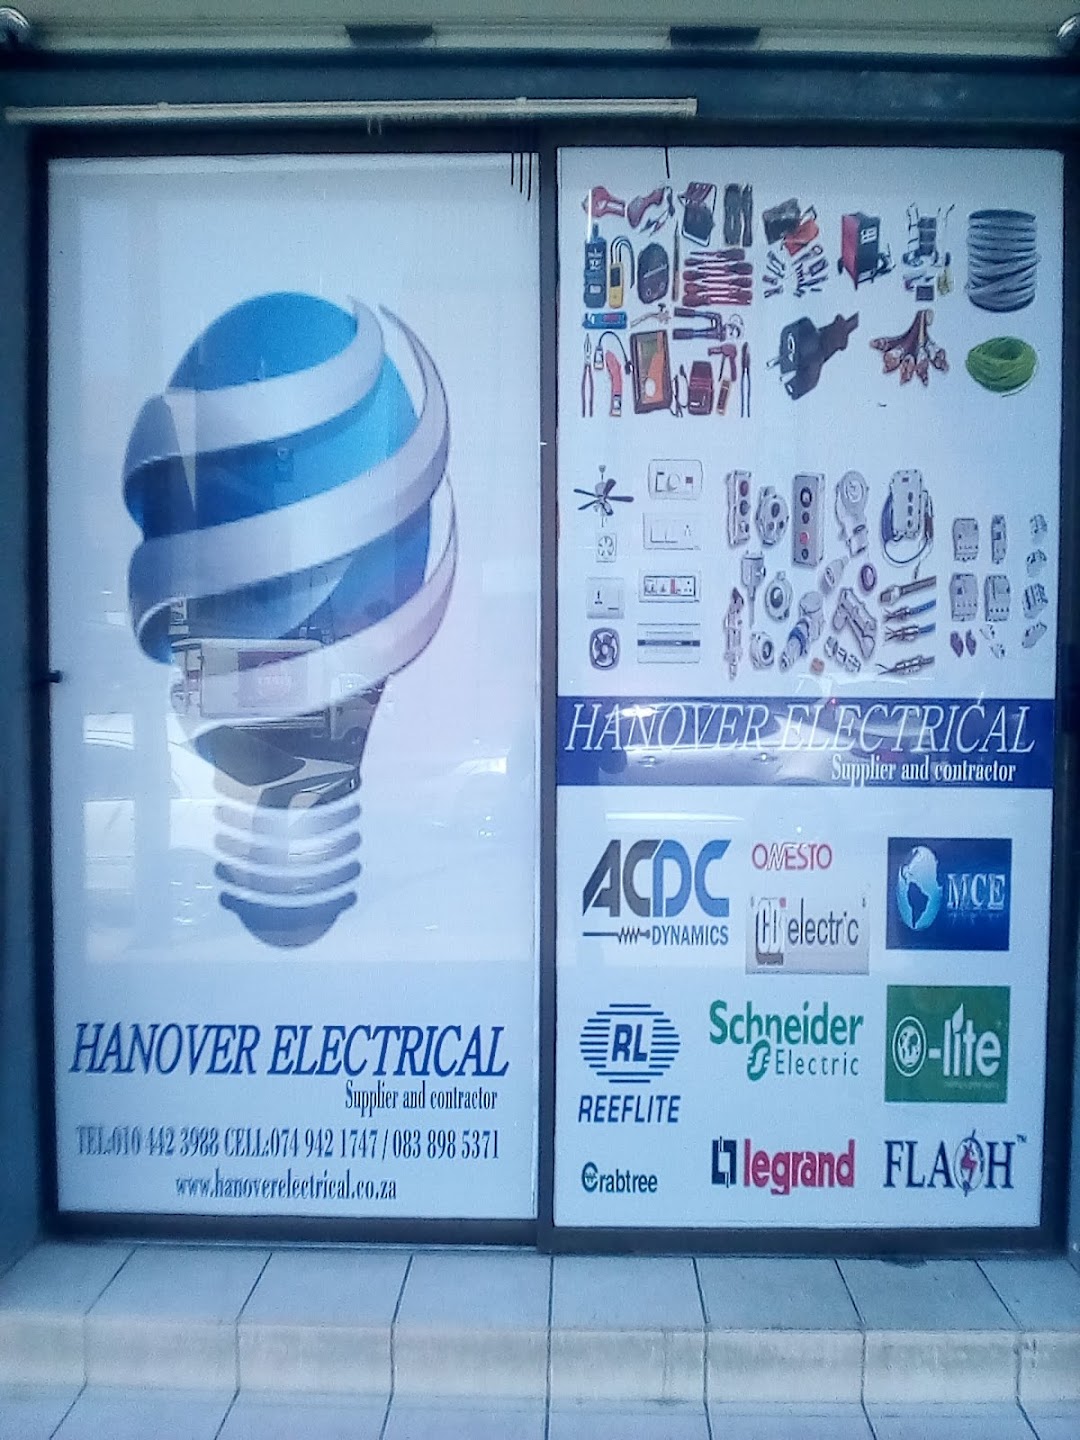 Hanover electrical supplier and contractor